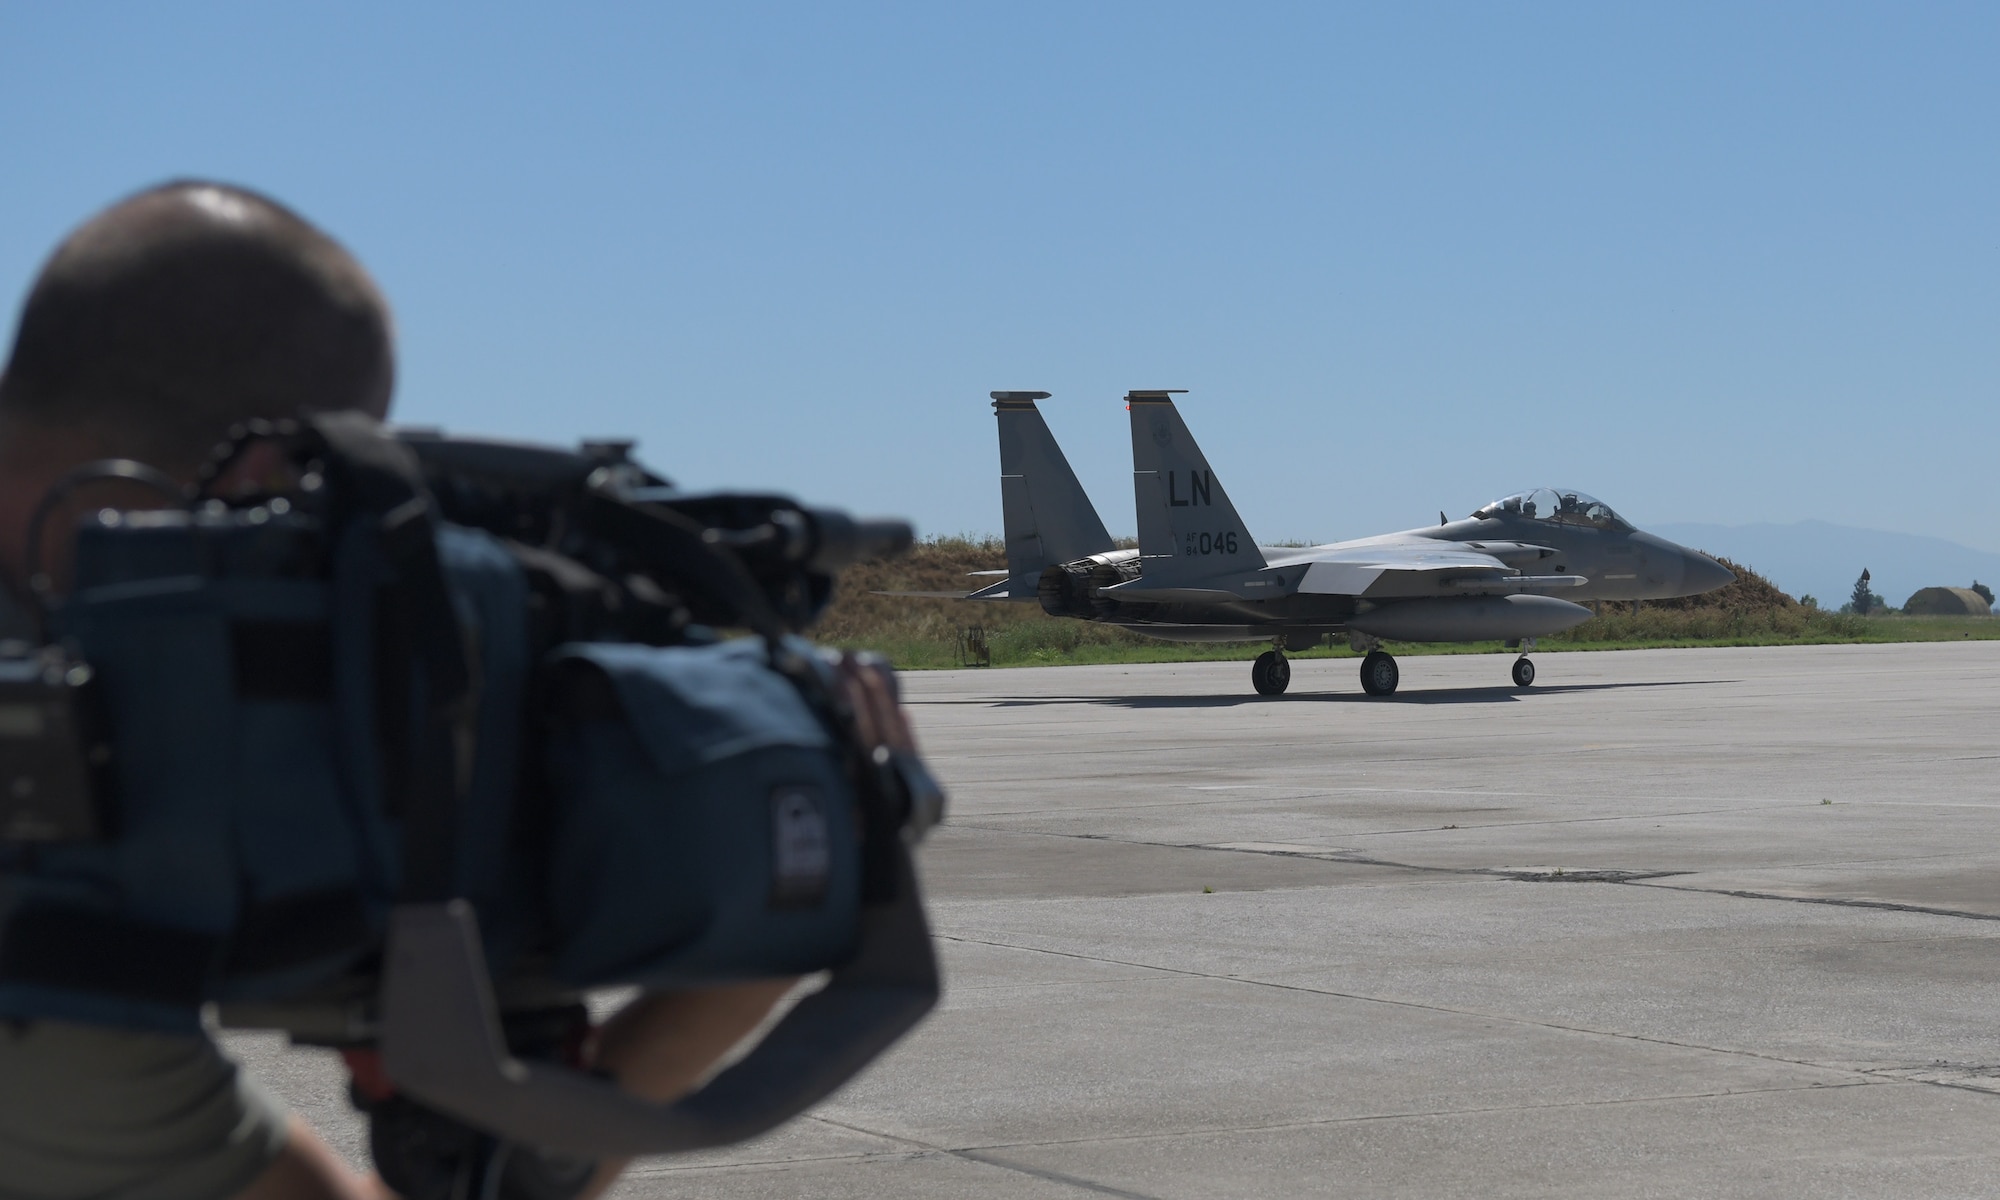 Local media films a U.S. Air Force F-15C Eagle assigned to the 493rd Fighter Squadron during exercise Astral Knight 21 at Larissa Air Base, Greece, May 19, 2021. The 48th Fighter Wing trained with military forces from Albania, Croatia, Greece, Italy, and Slovenia as well as U.S. units from around European Command enhancing the readiness, strength and cohesion of these alliances. (U.S. Air Force photo by Tech. Sgt. Alex Fox Echols III)